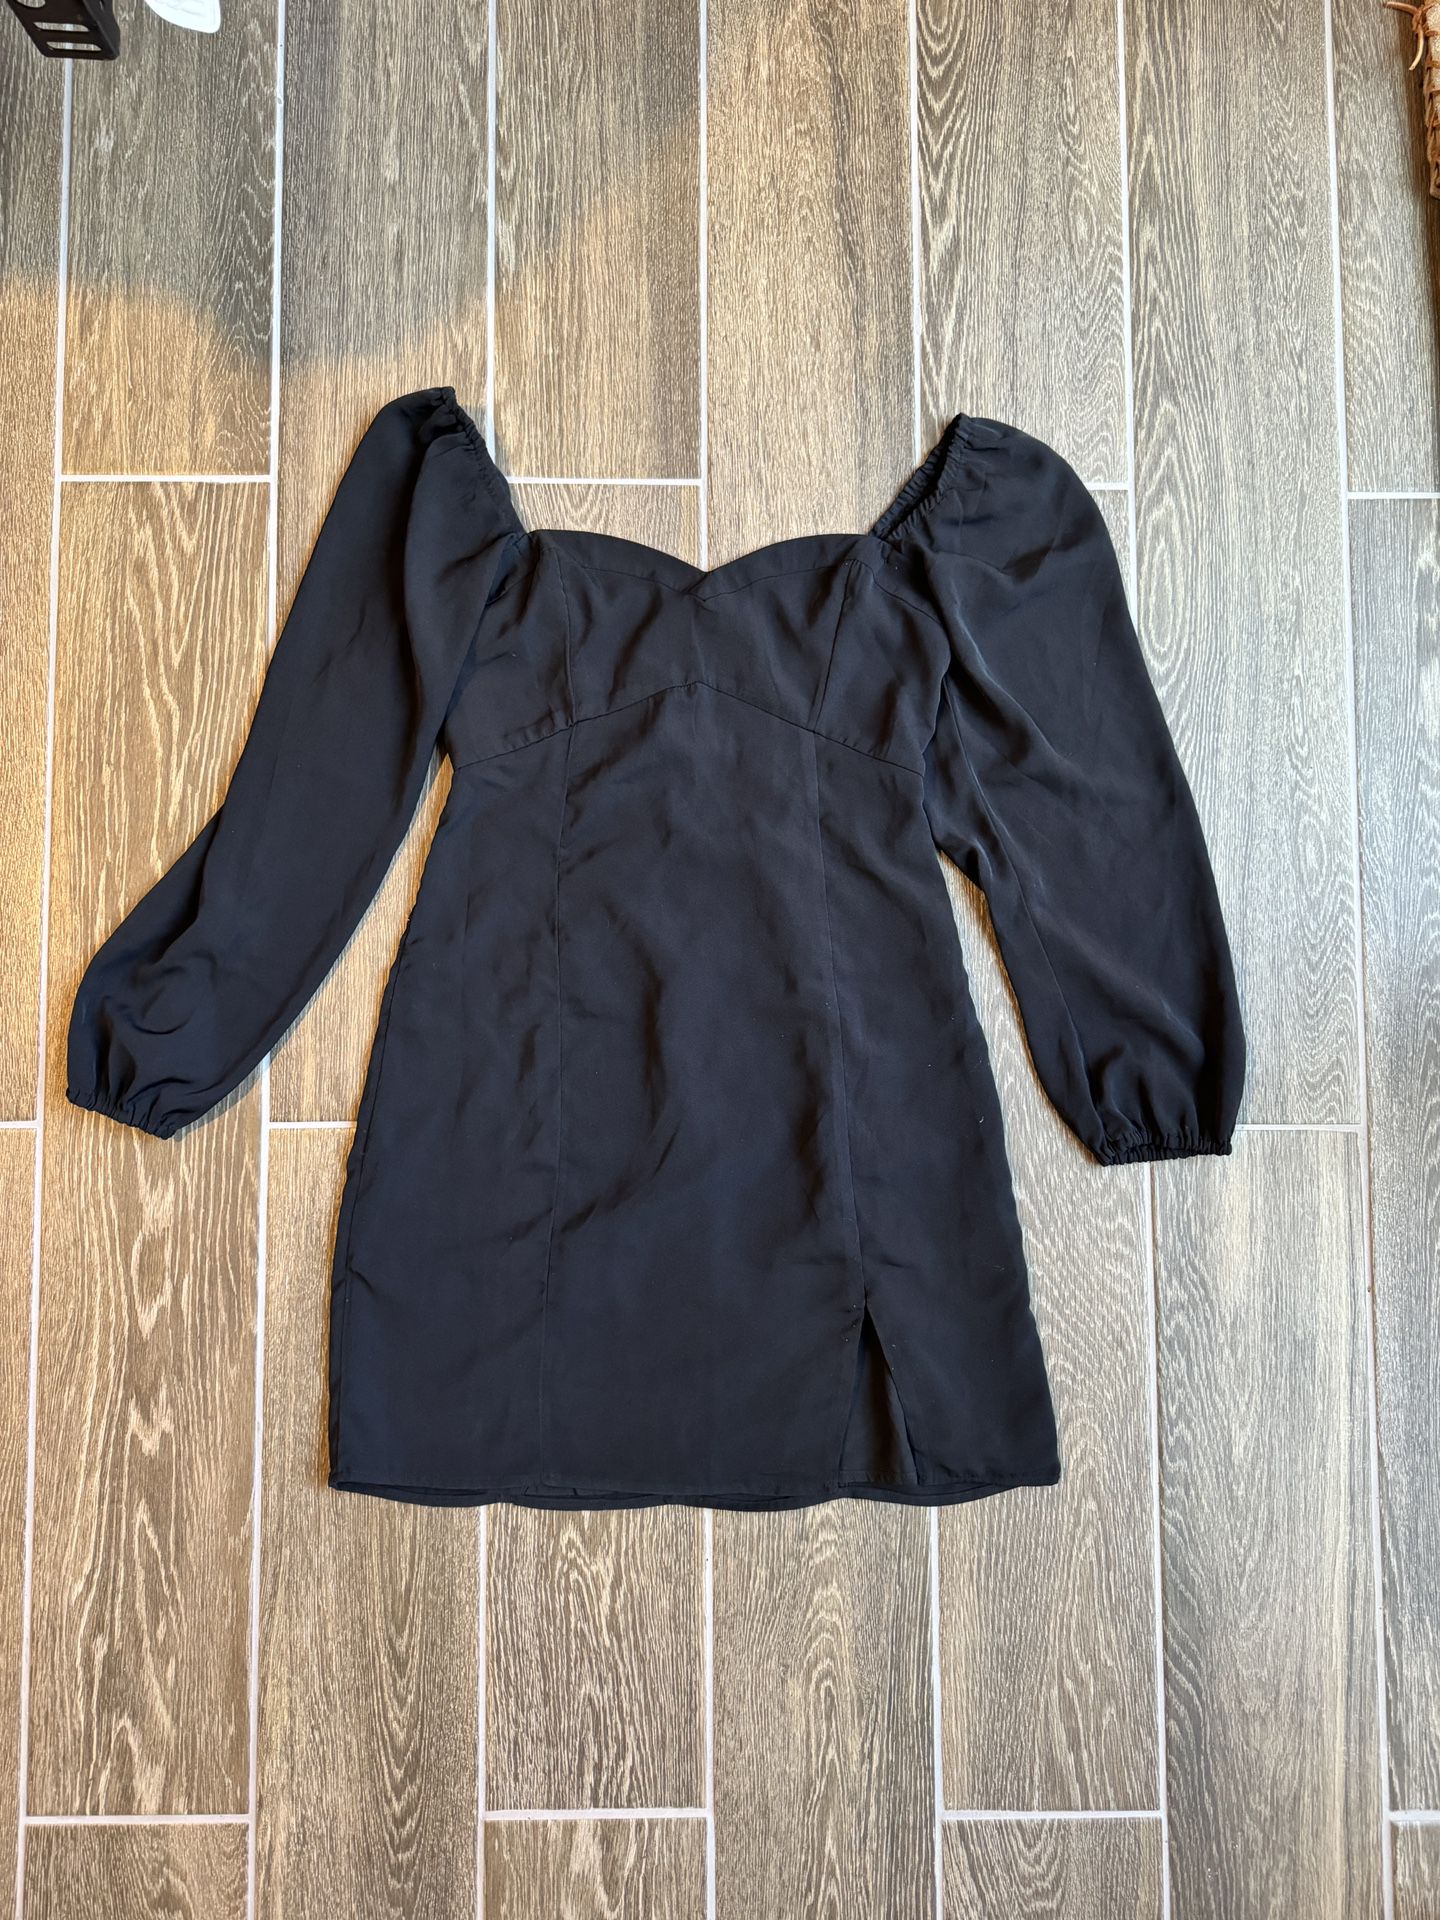 Abercrombie And Fitch Black Dress